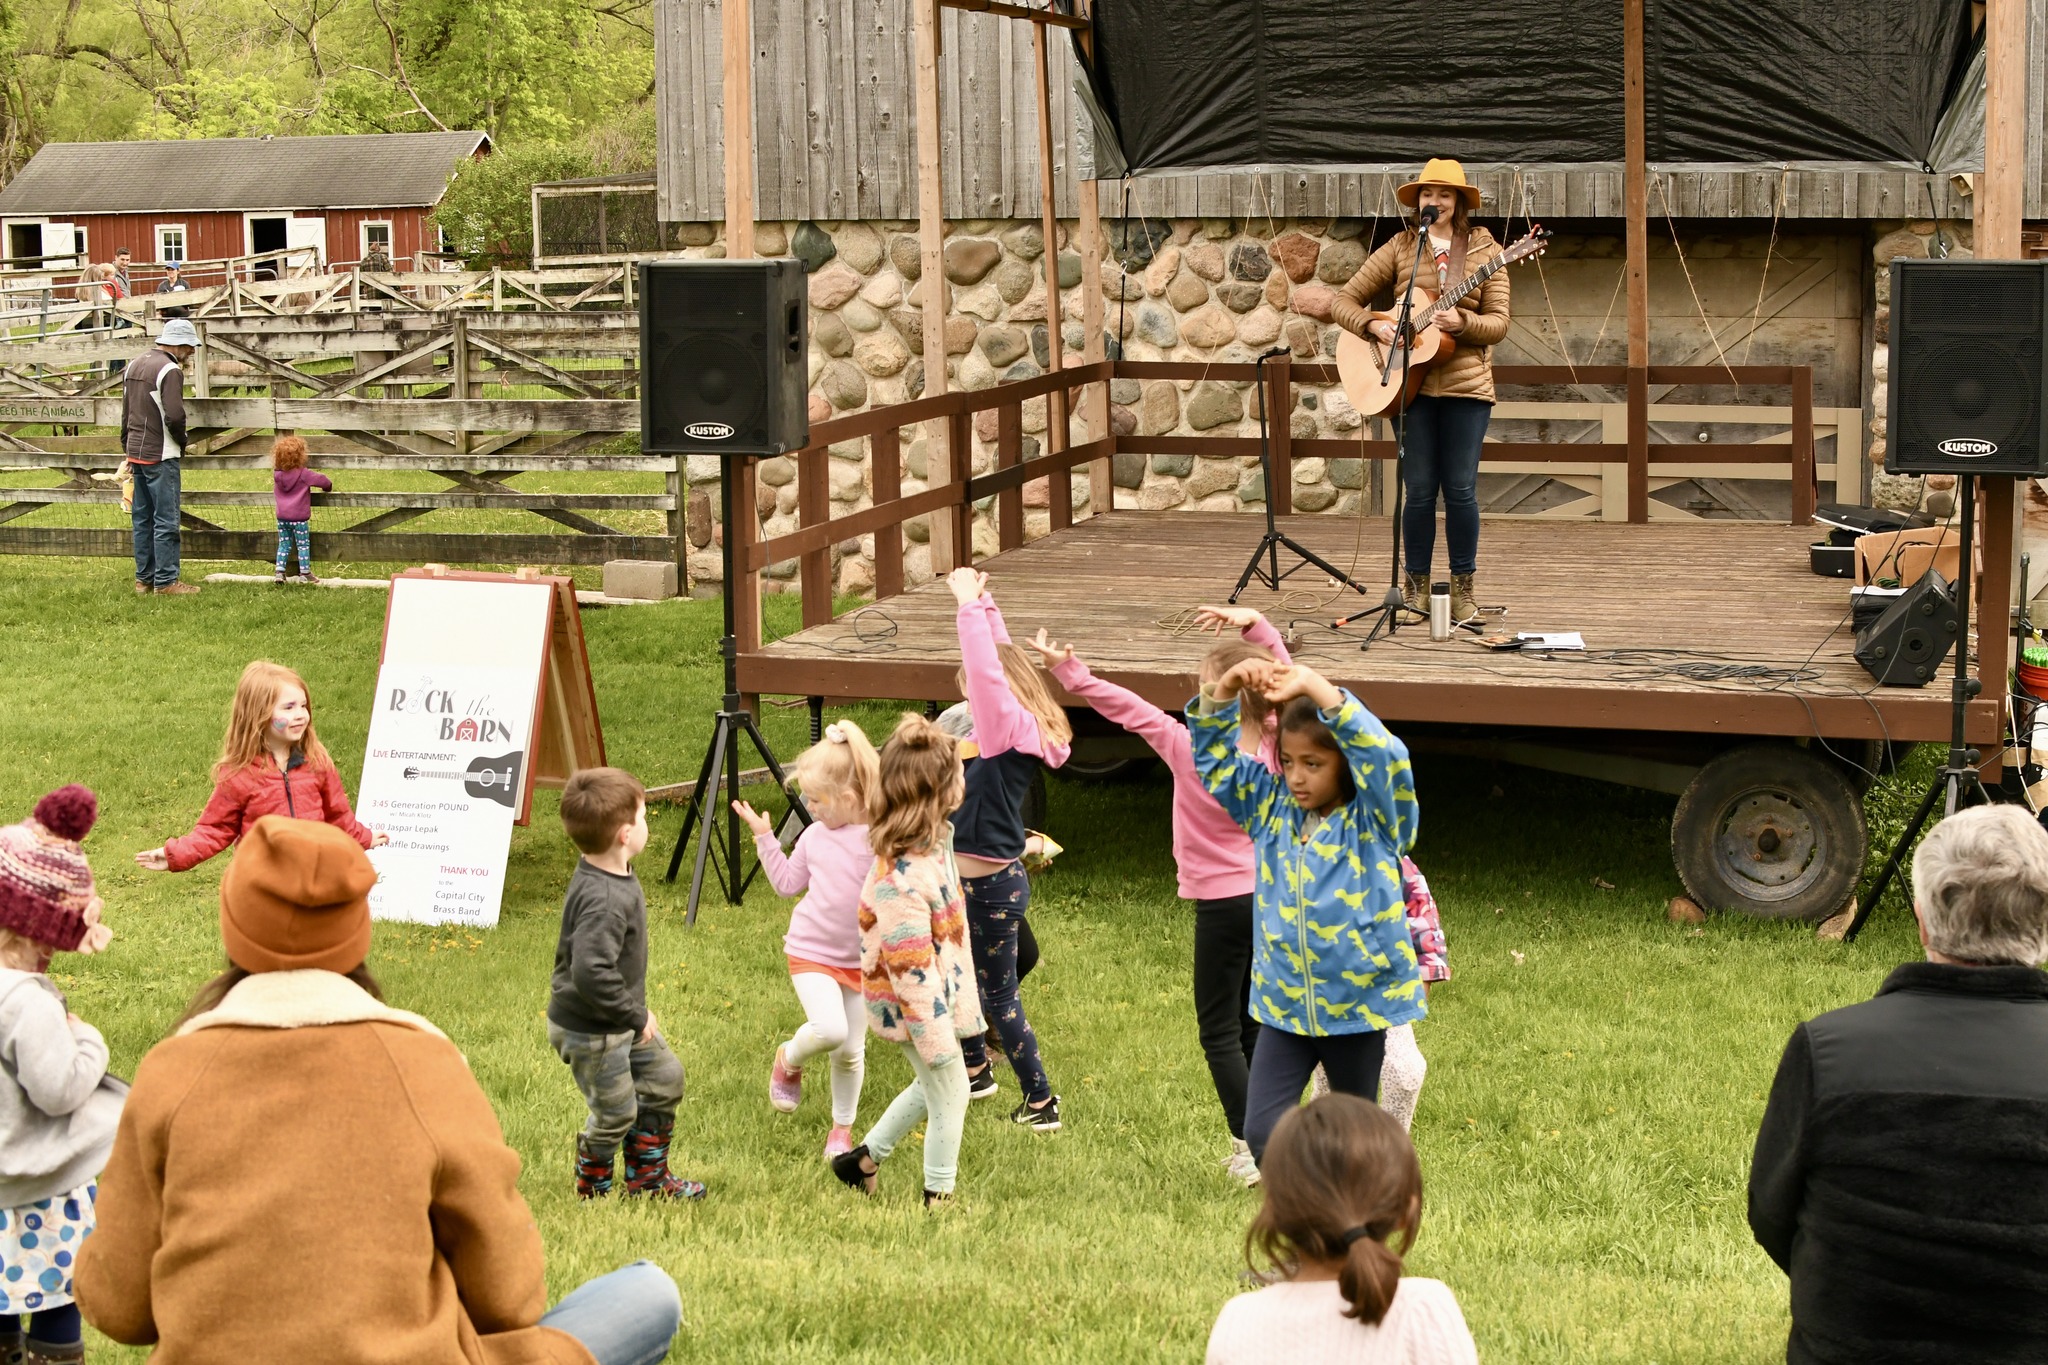 Rock the Barn at Dodge Nature Center